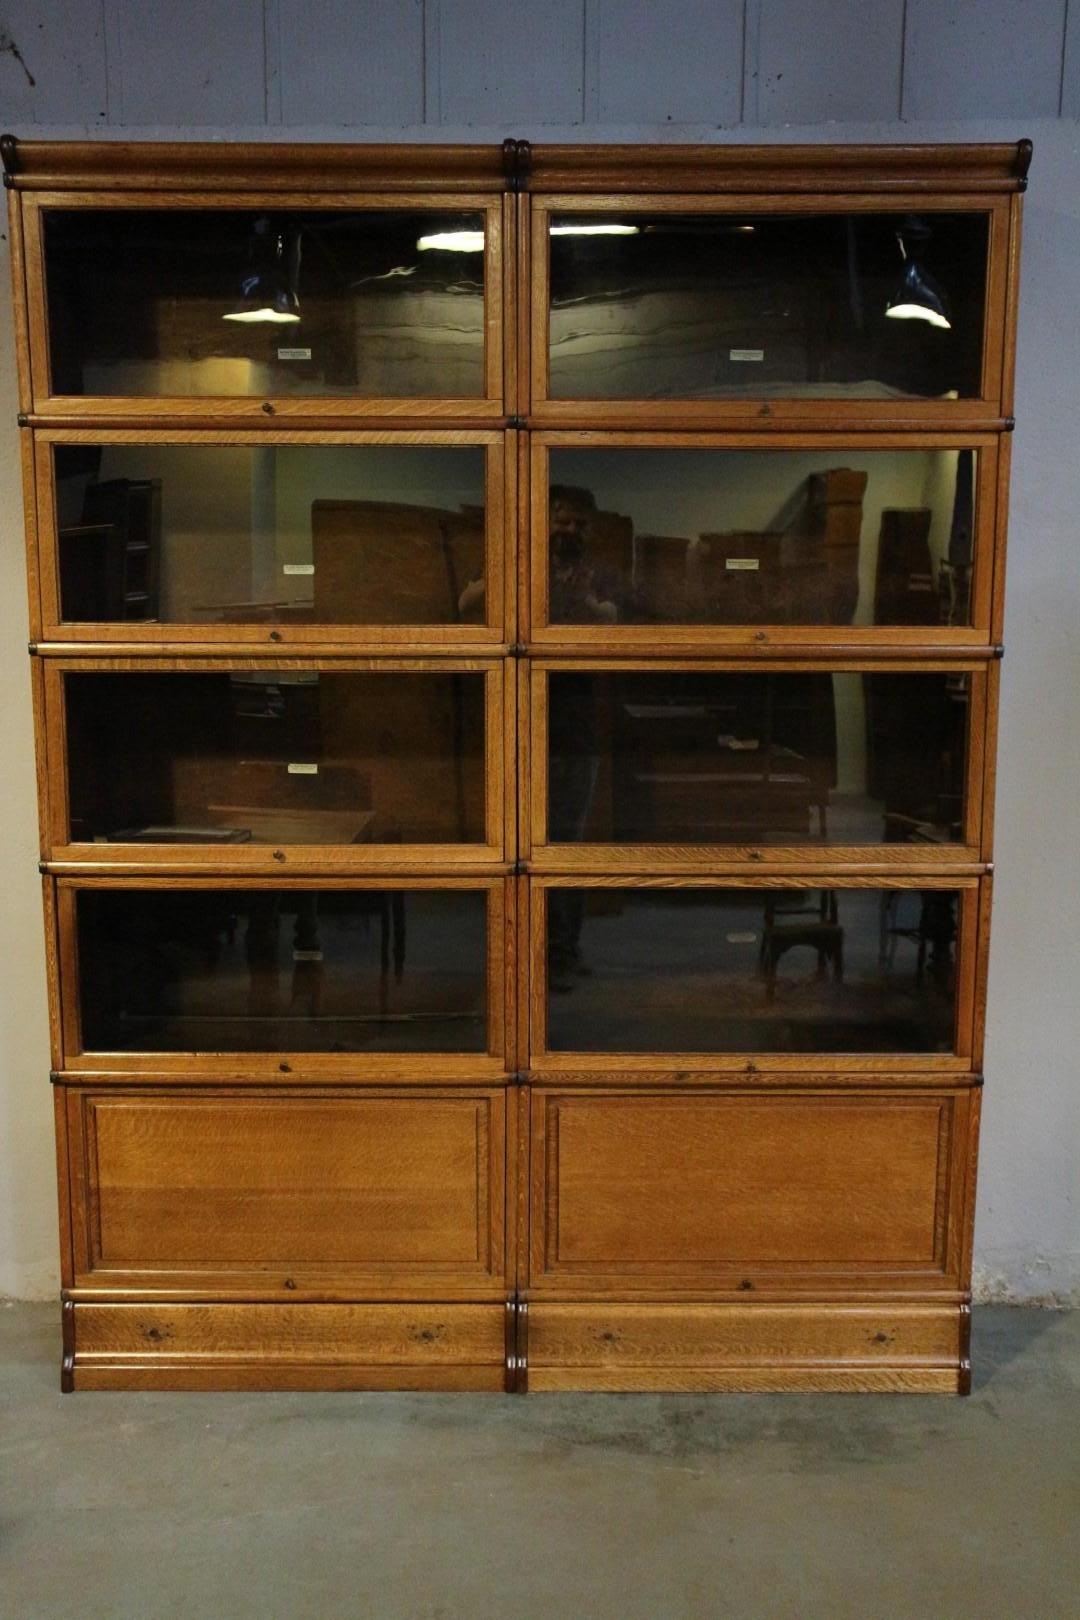 Beautiful antique oak Globe Wernicke bookcase. in perfect condition. The cabinet consists of 10 large stackable parts, the lower ones have a wooden panel. The plinths are also fitted with drawers. All parts are suitable for file binder size books.